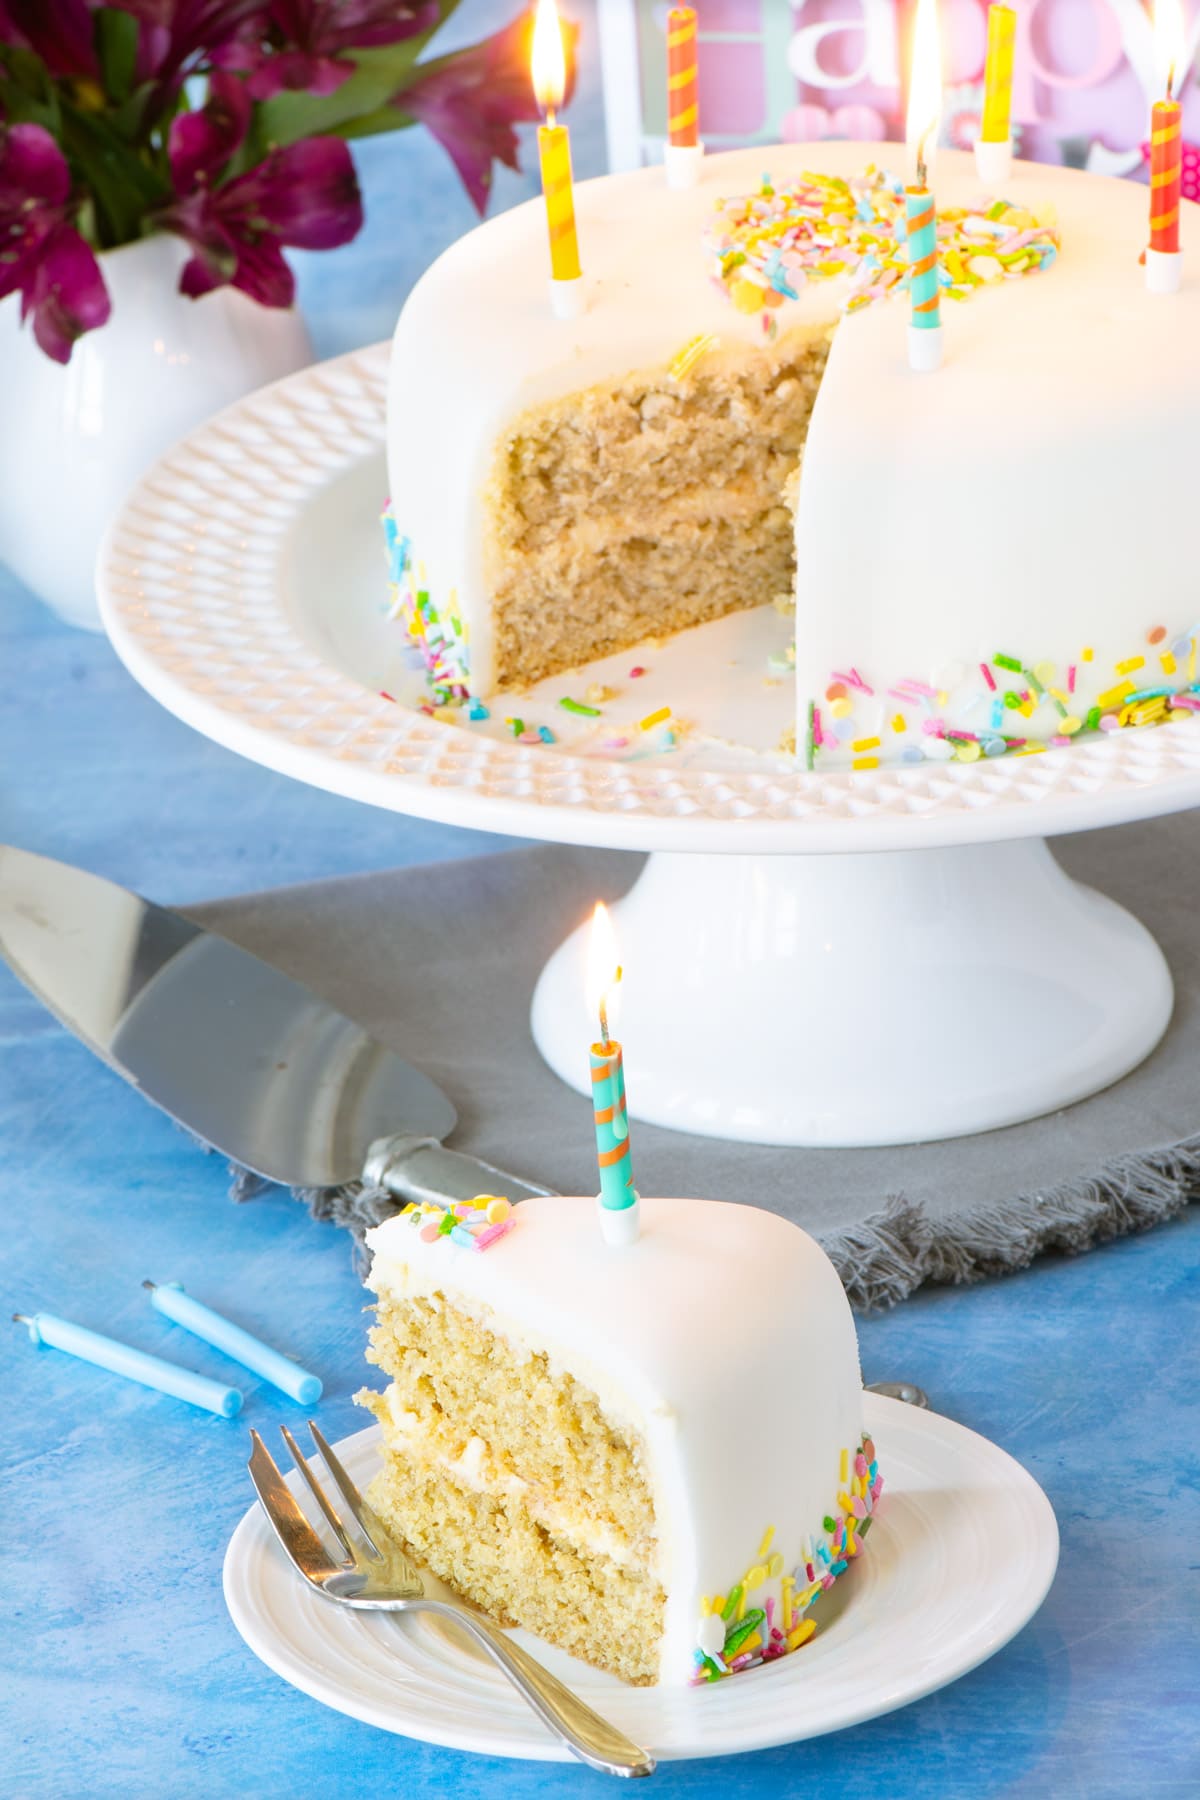 A slice of vegan birthday cake filled with vegan vanilla buttercream on a plate. The cake is decorated with vegan buttercream, white fondant icing and colourful sprinkles.